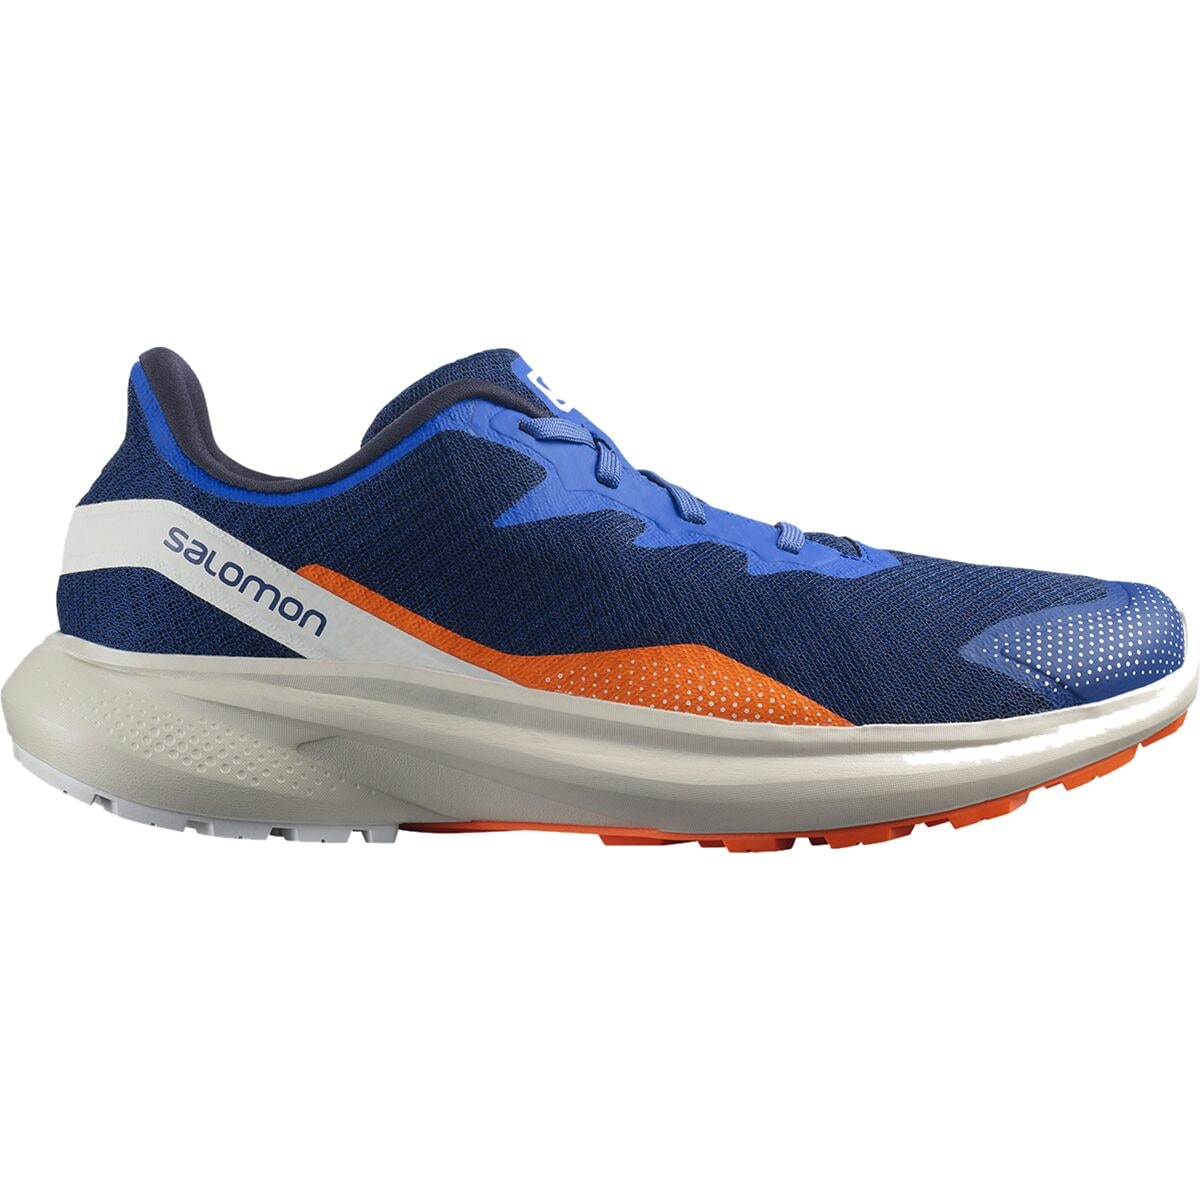 Under Armour Charged Impulse 2 Men's Running Shoes